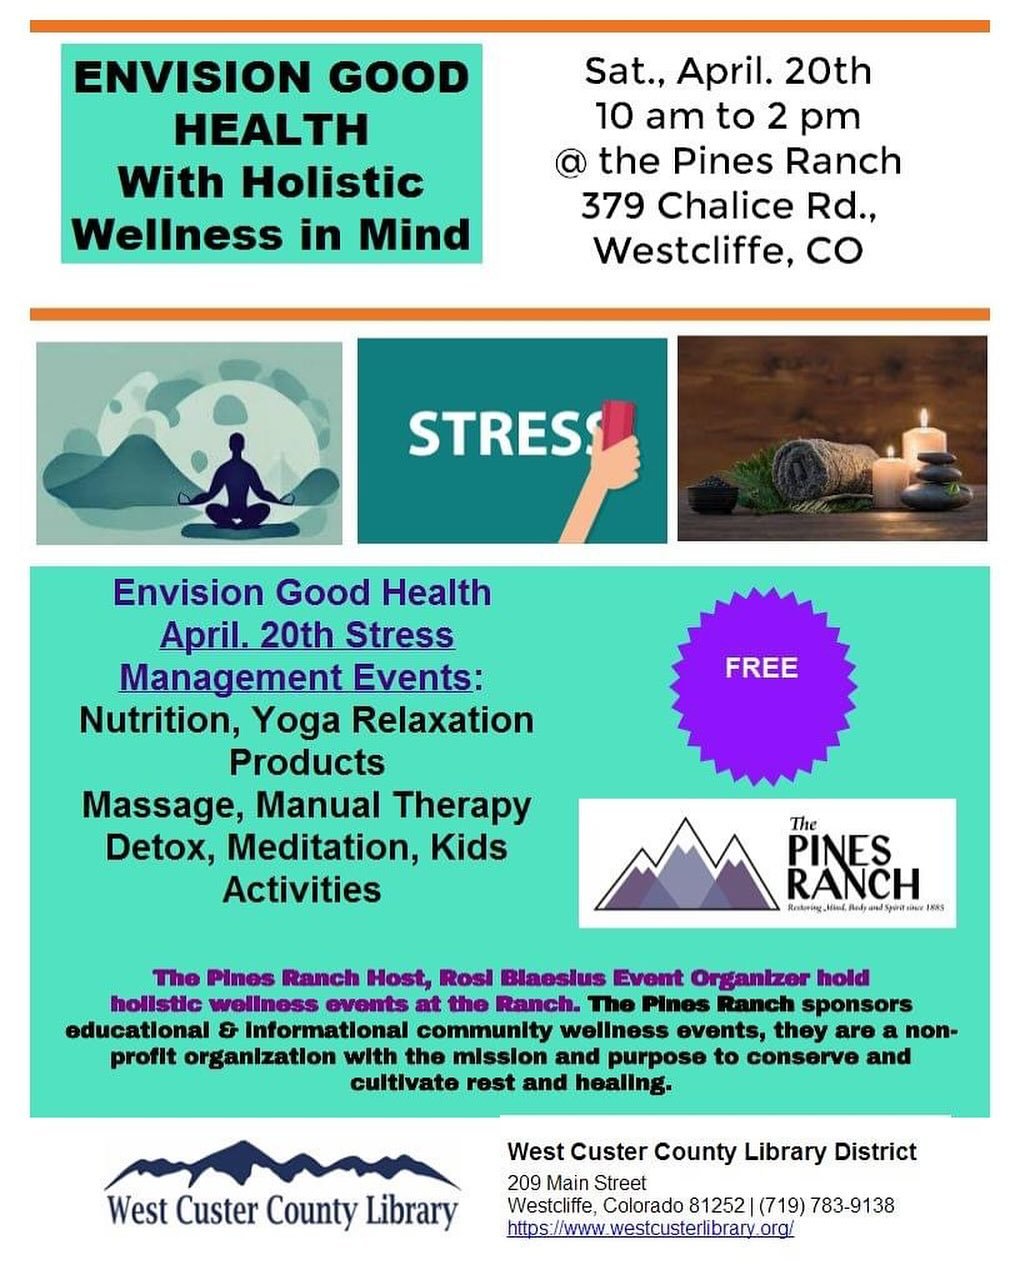 Happy Spring! Excited for the upcoming season and opening the farm to visitors.

Join us this Saturday at The Pines Ranch in Westcliffe to get tips on stress management and wellness.

Take a break and come out to support the community.